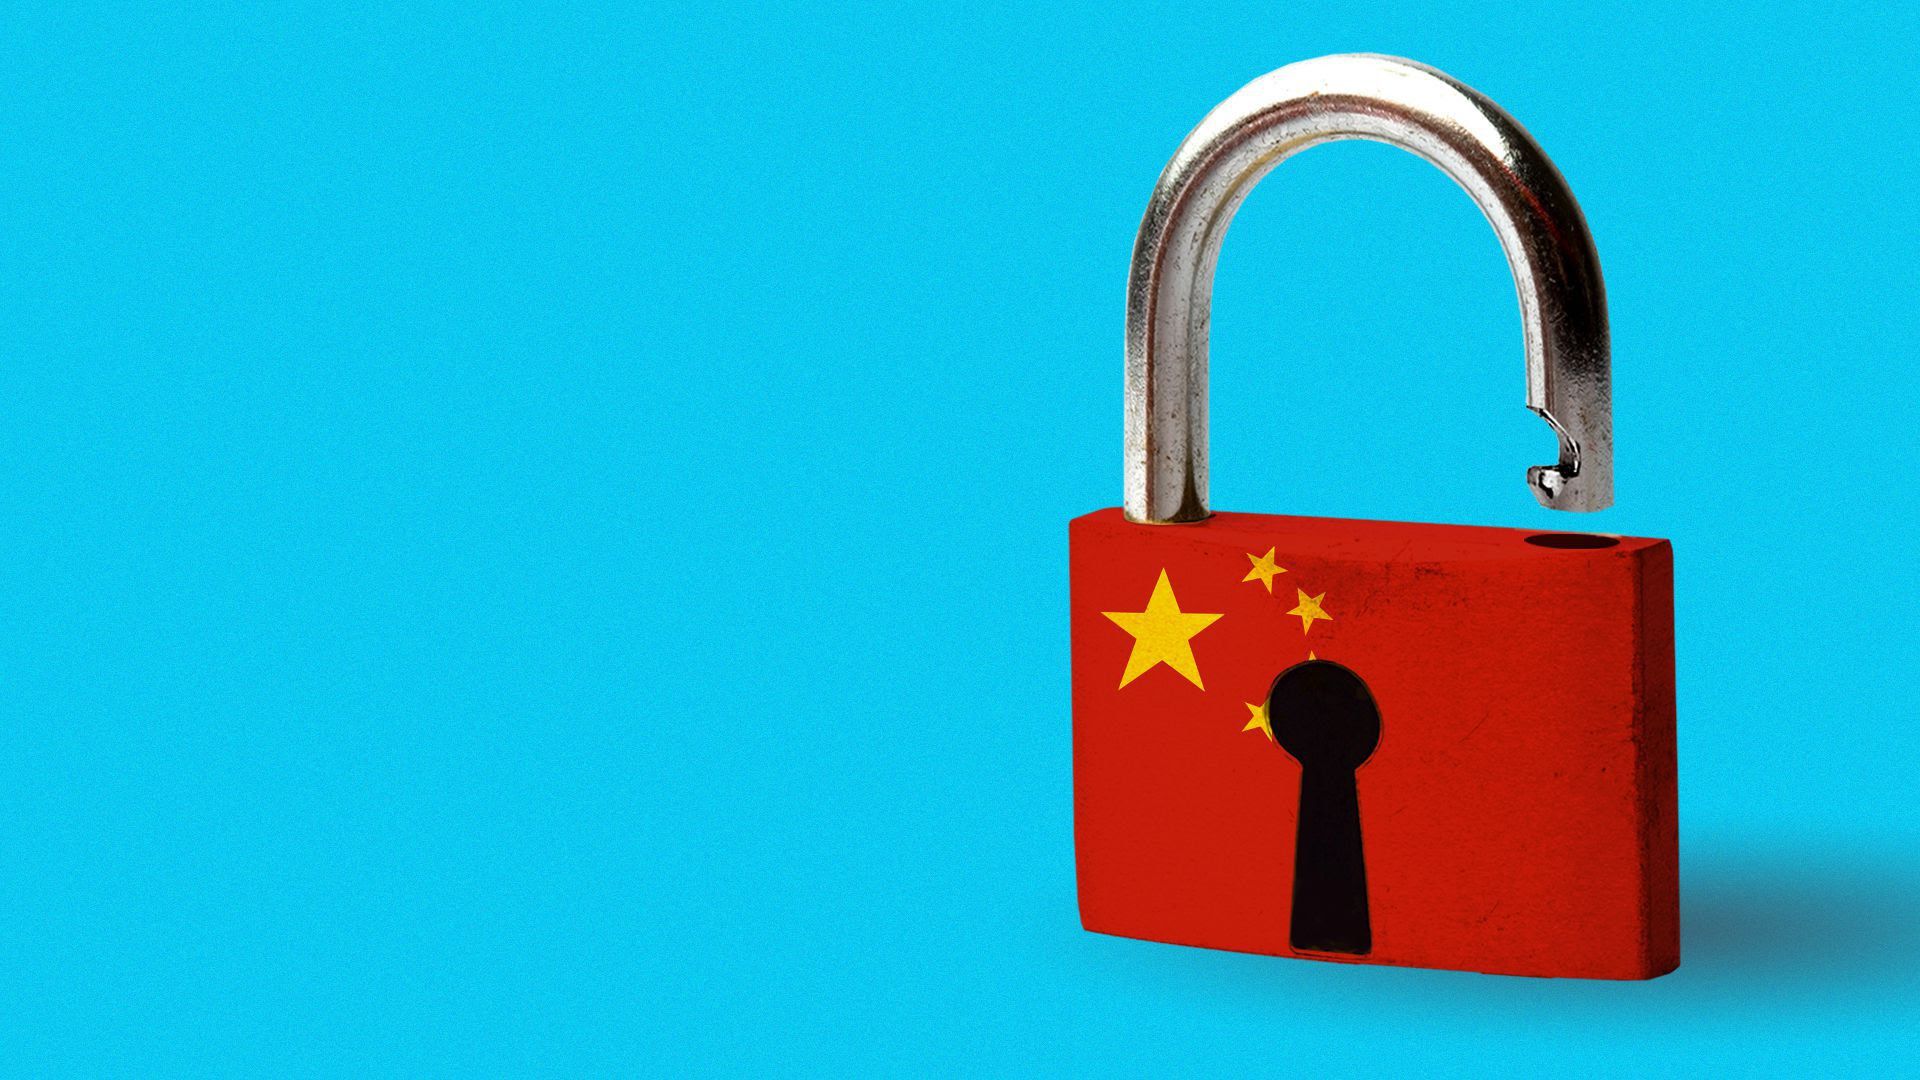 An illustration of a lock with a china flag printed on it